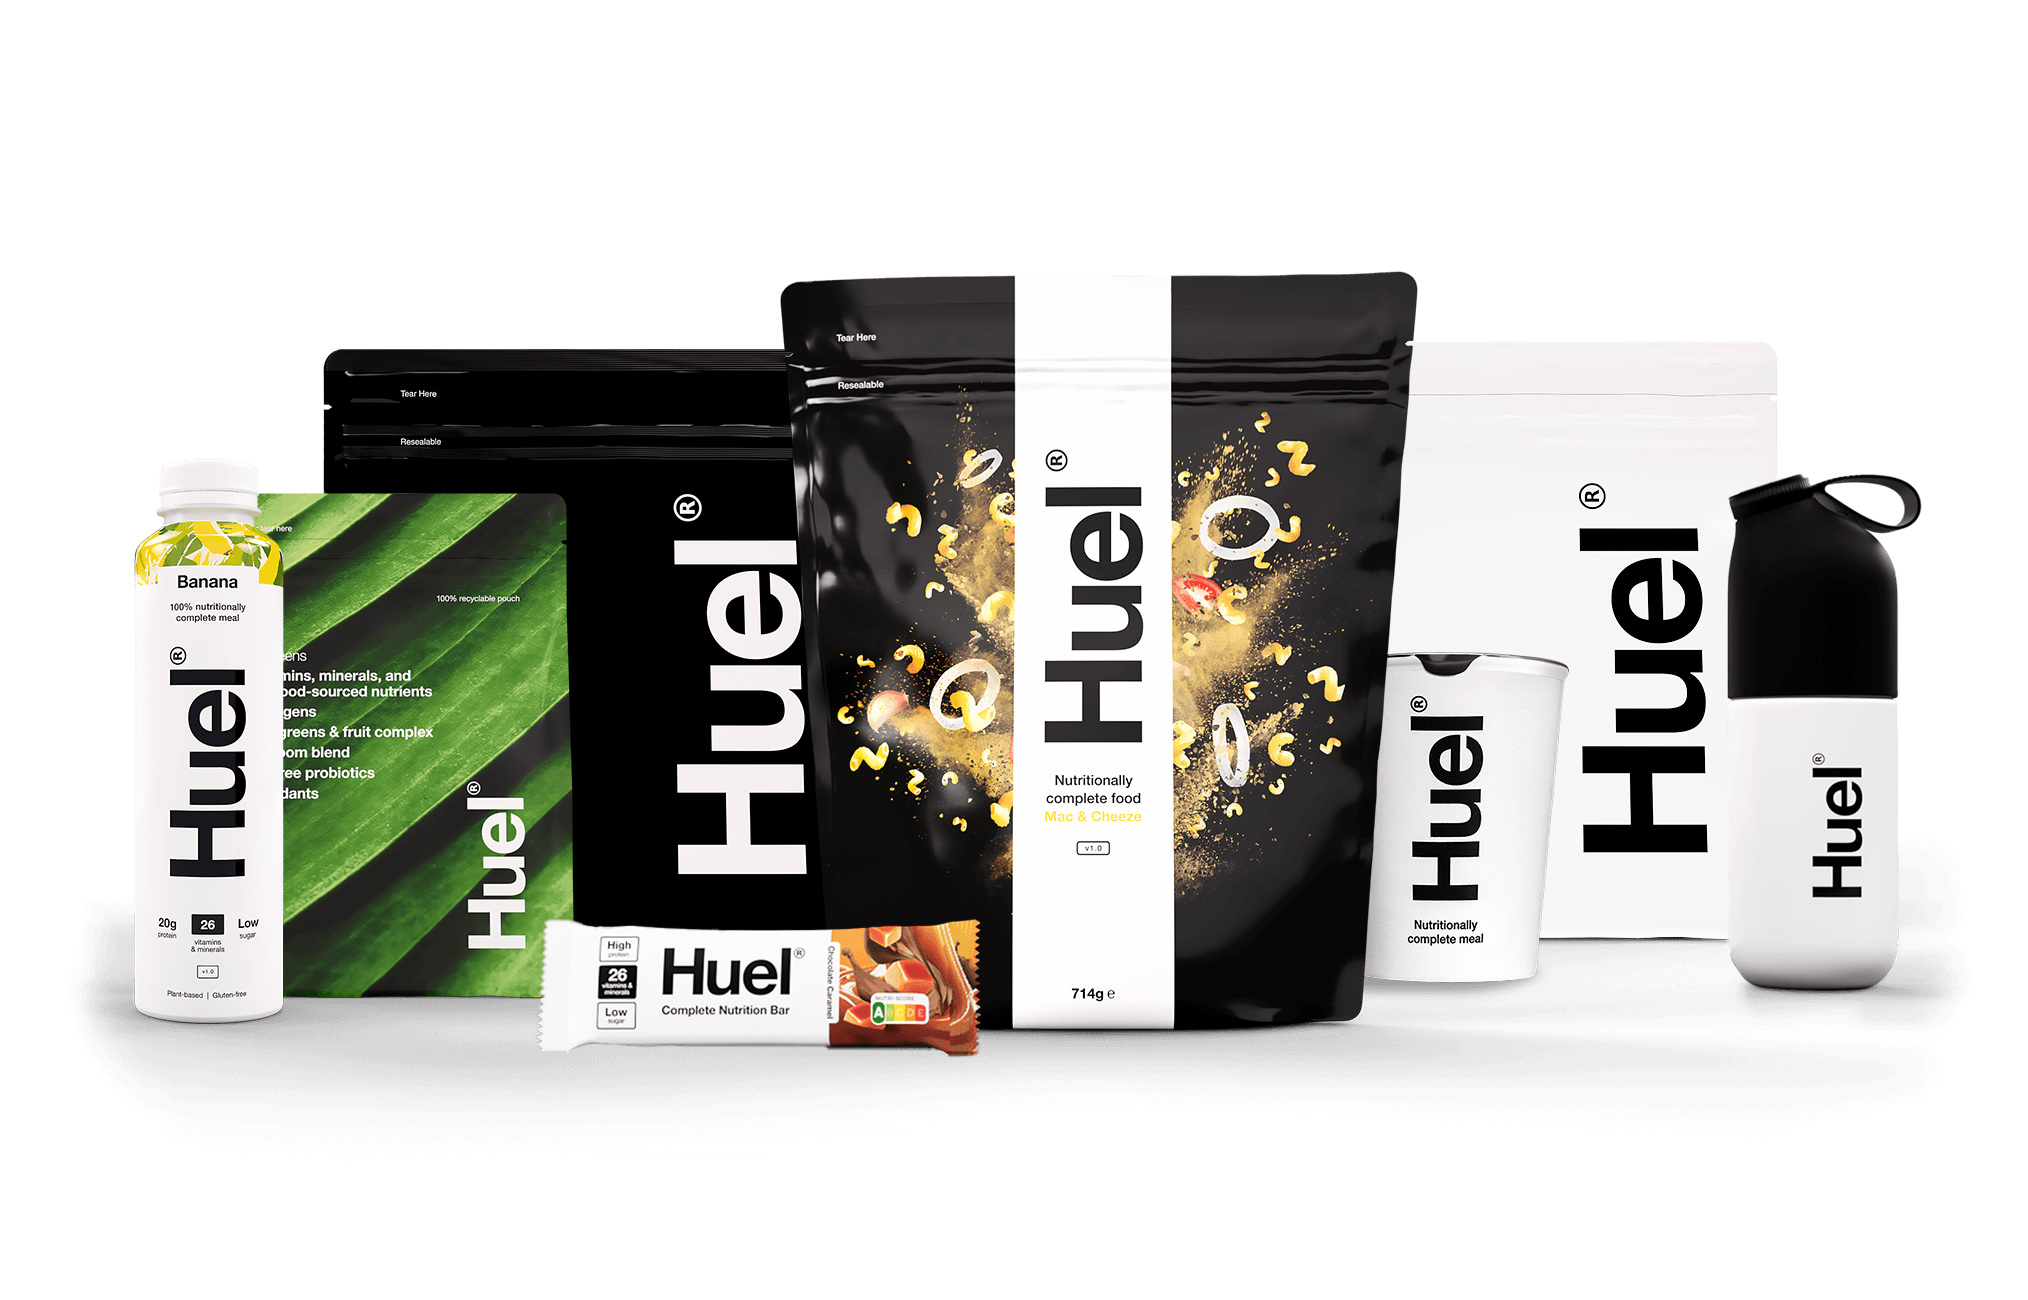 The New Huel Essential Powder Provides A Nutritious Meal For Just